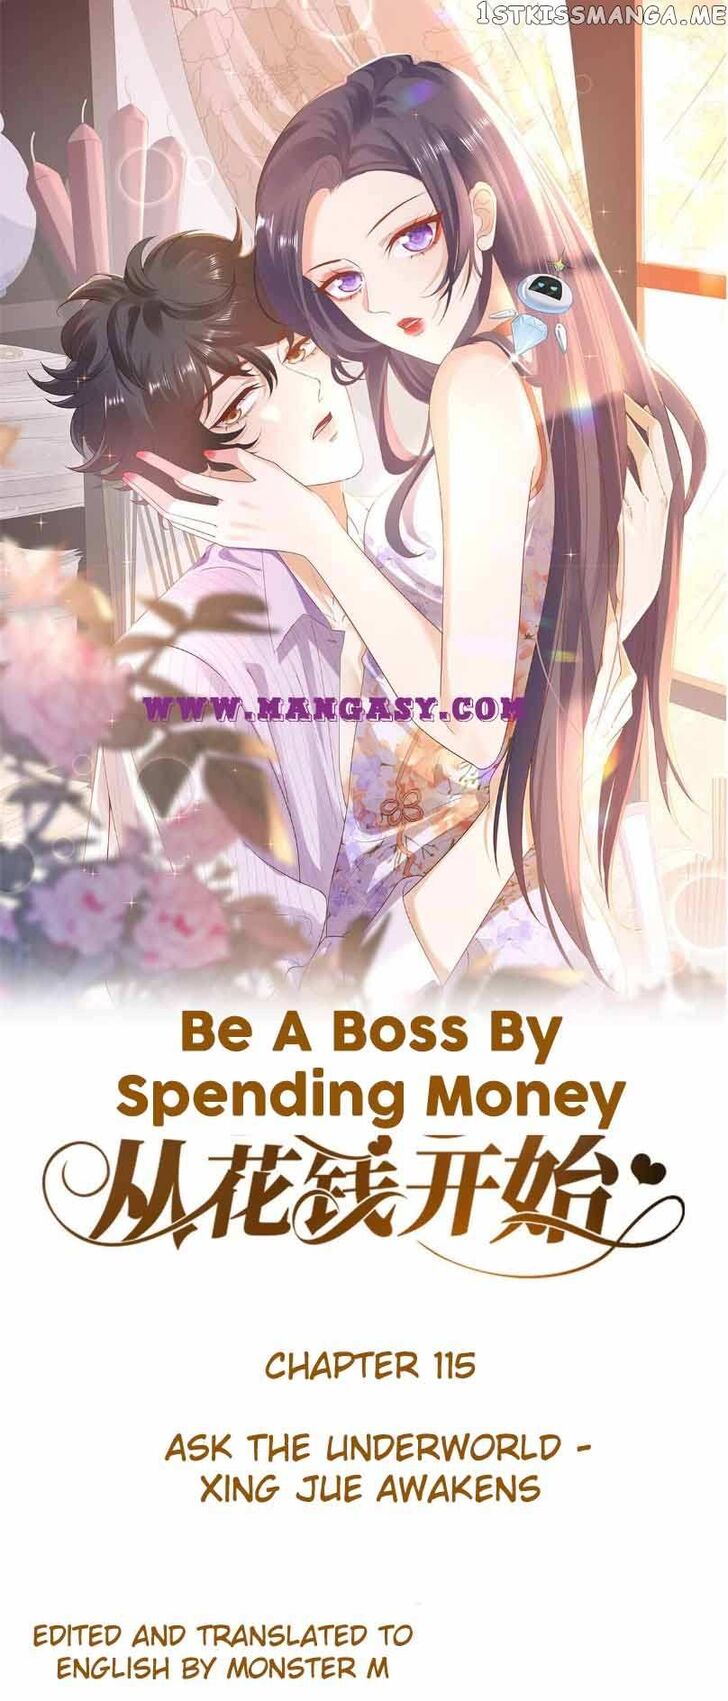 Becoming a Big Boss Starts With Spending Money Ch.115